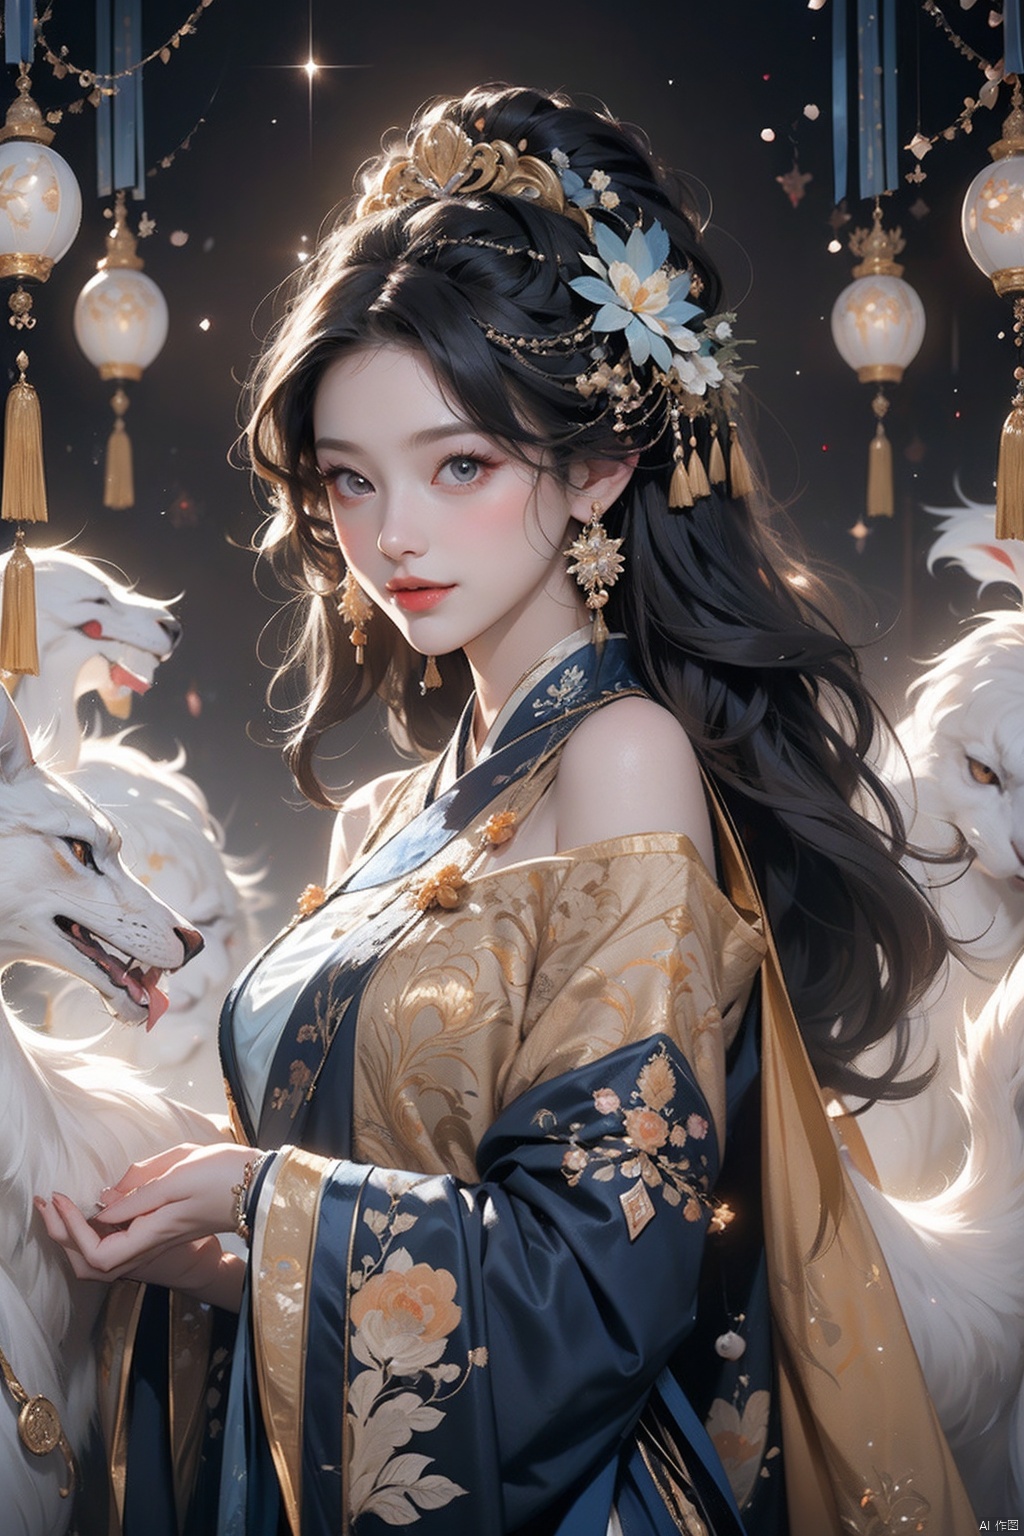 HUBG_Rococo_Style(loanword),

1girl, hanfu,

Portrait of noble and graceful goddess, dressed in blue and gold, elaborate coiffure hairstyle, dark hair, decoration,

16K, UHD, HDR, Brilliant scene with bright lights, mist, numerous decorations, joyful atmosphere, light smile,